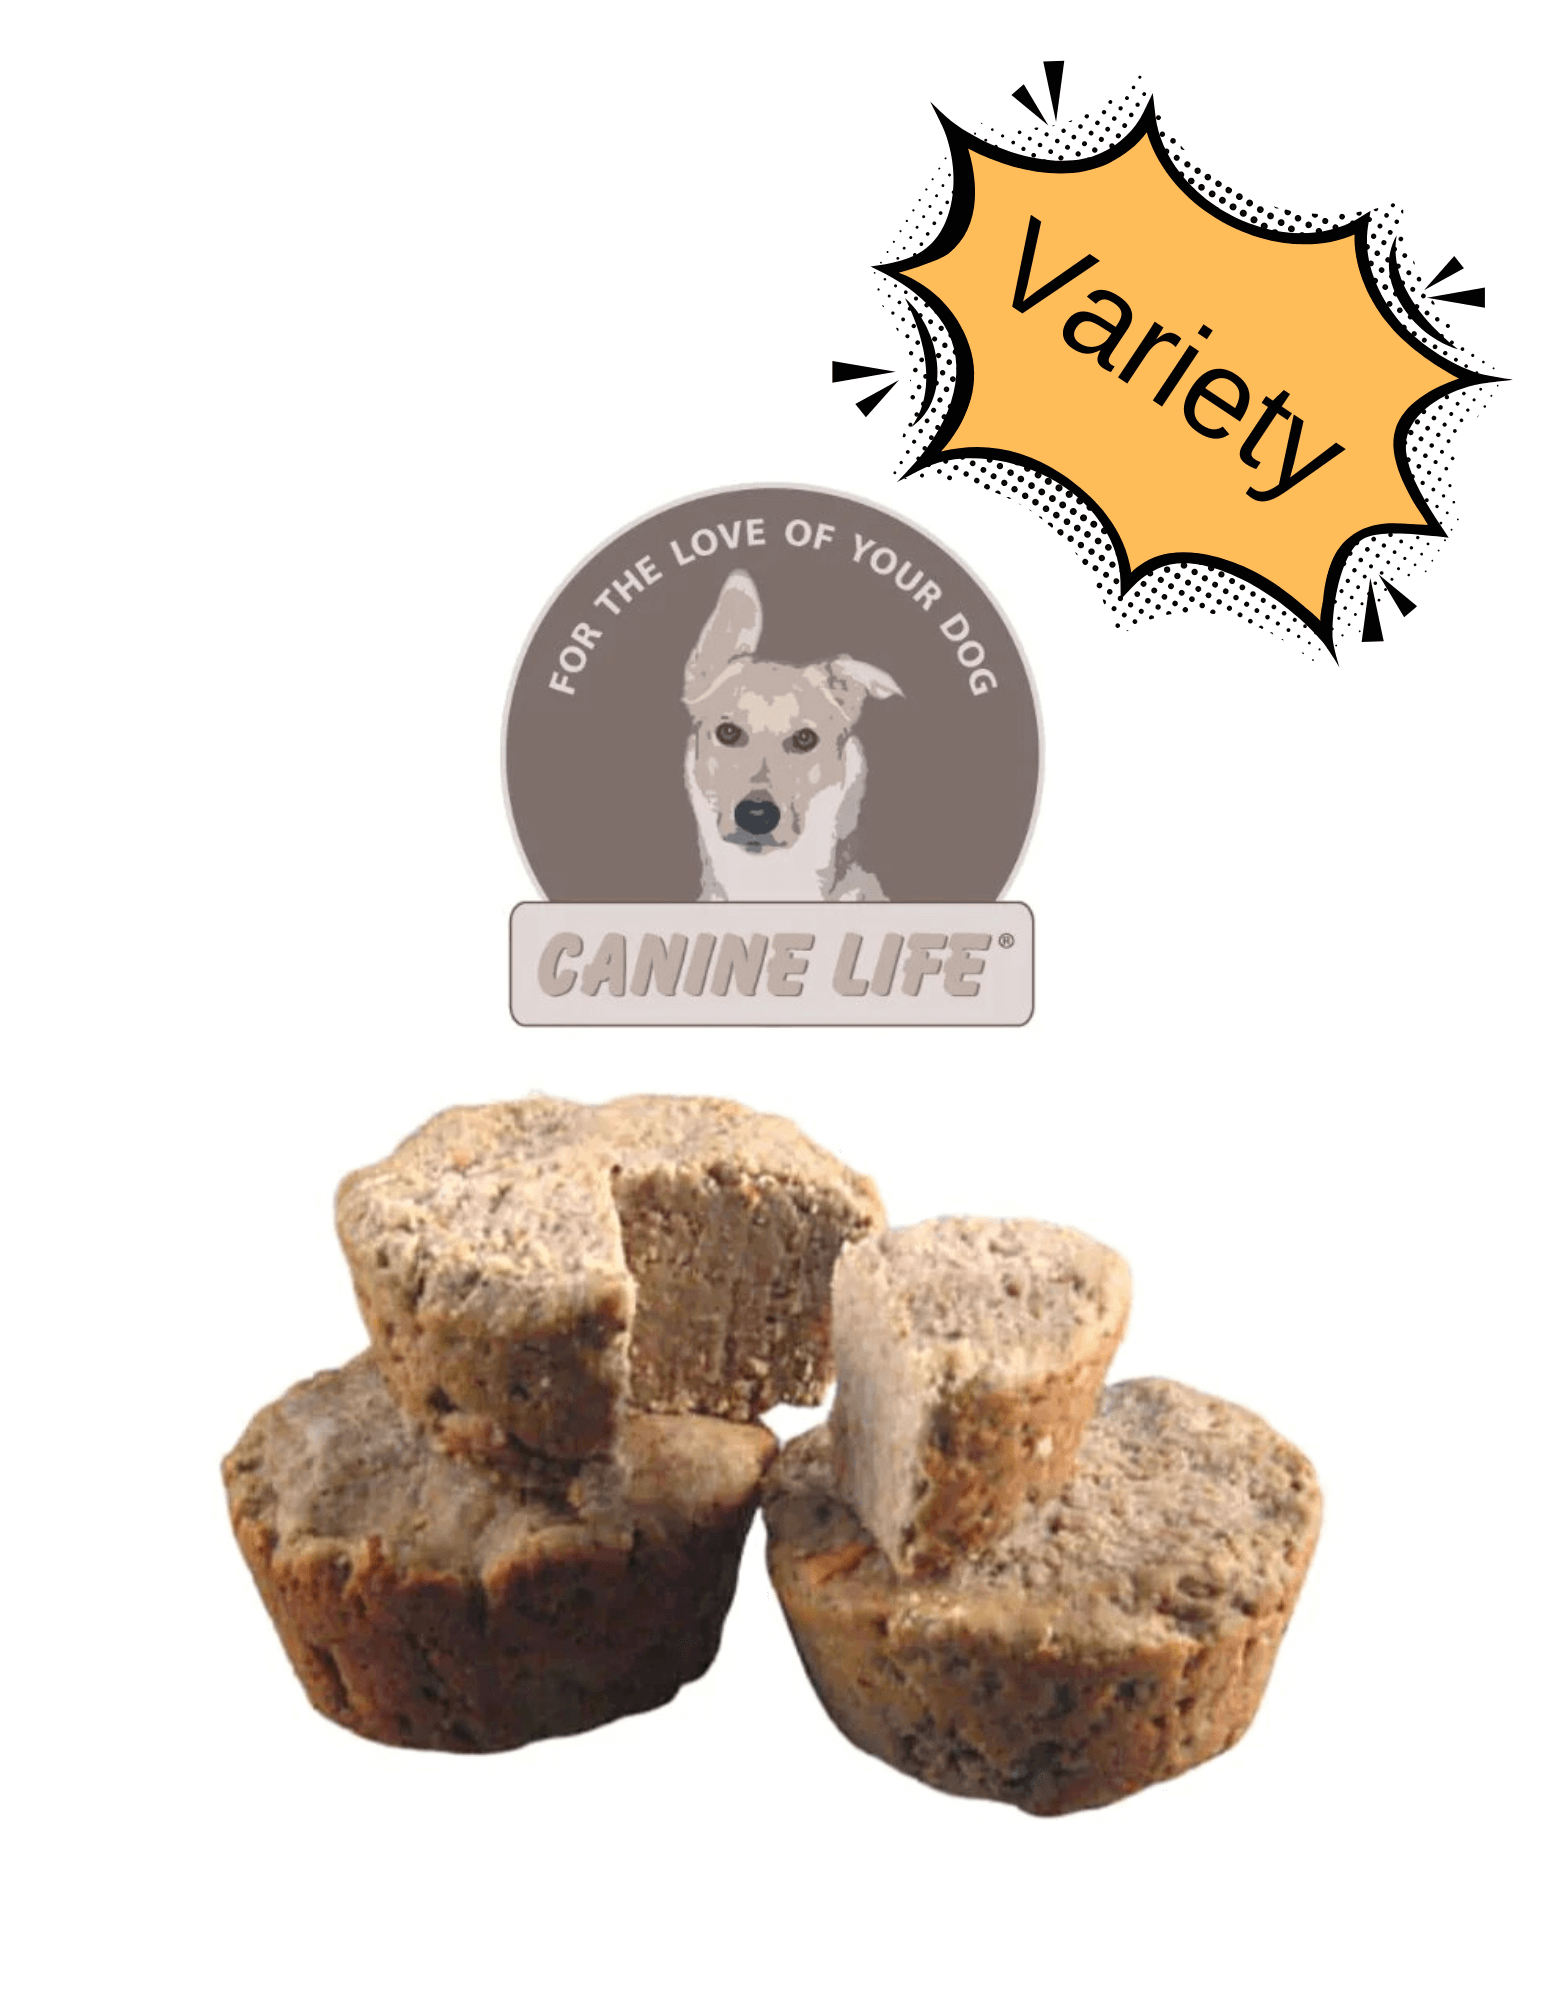 Canine Life - Variety Pack (Lamb, Tuna, Salmon) (For Dogs) - Frozen Product